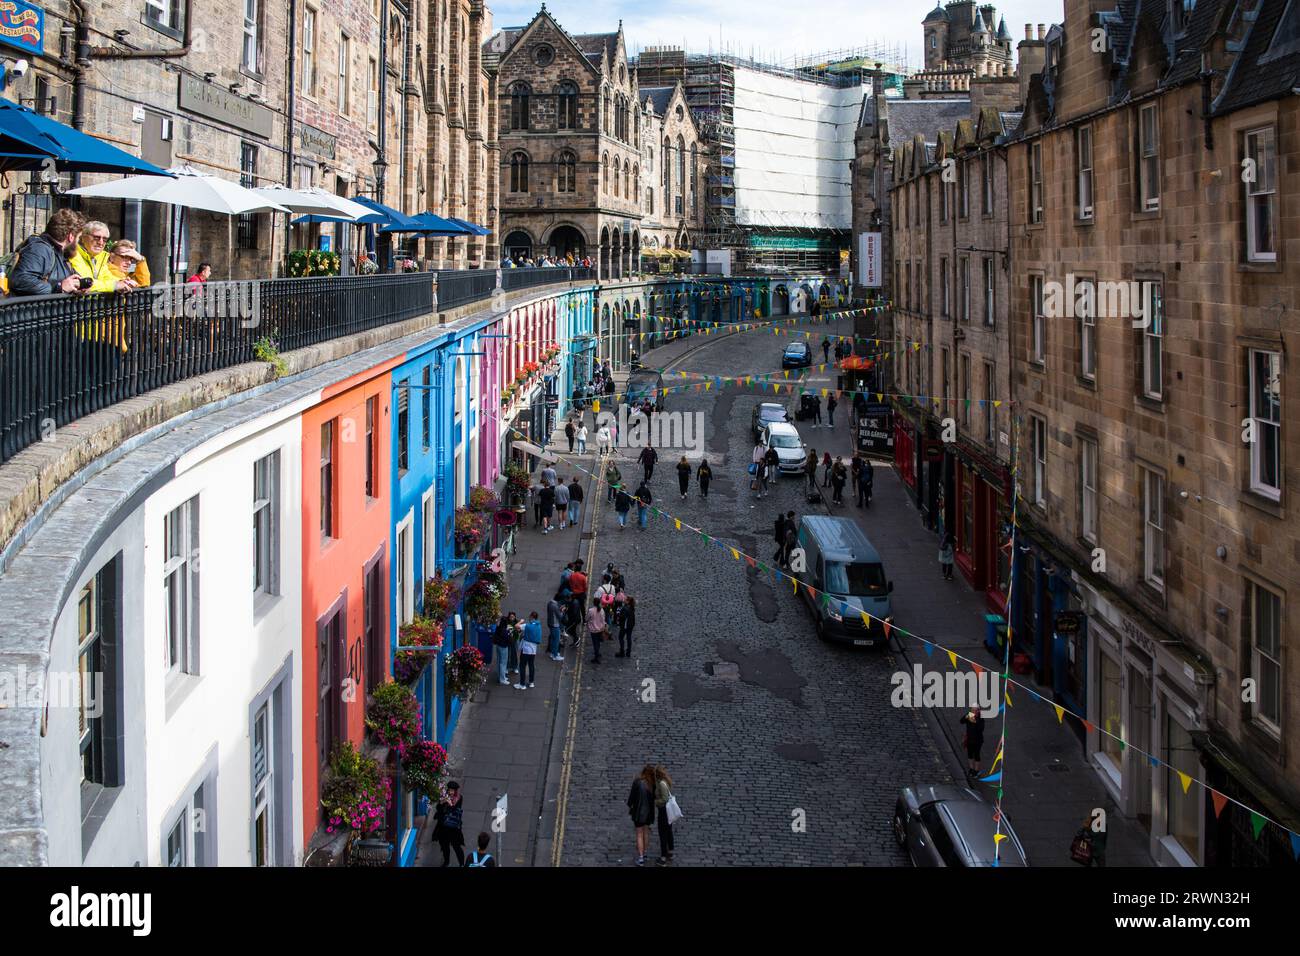 looking Up West Bow Street filled with colourful shop fronts in the City of Edinburgh, Scotland. Stock Photo